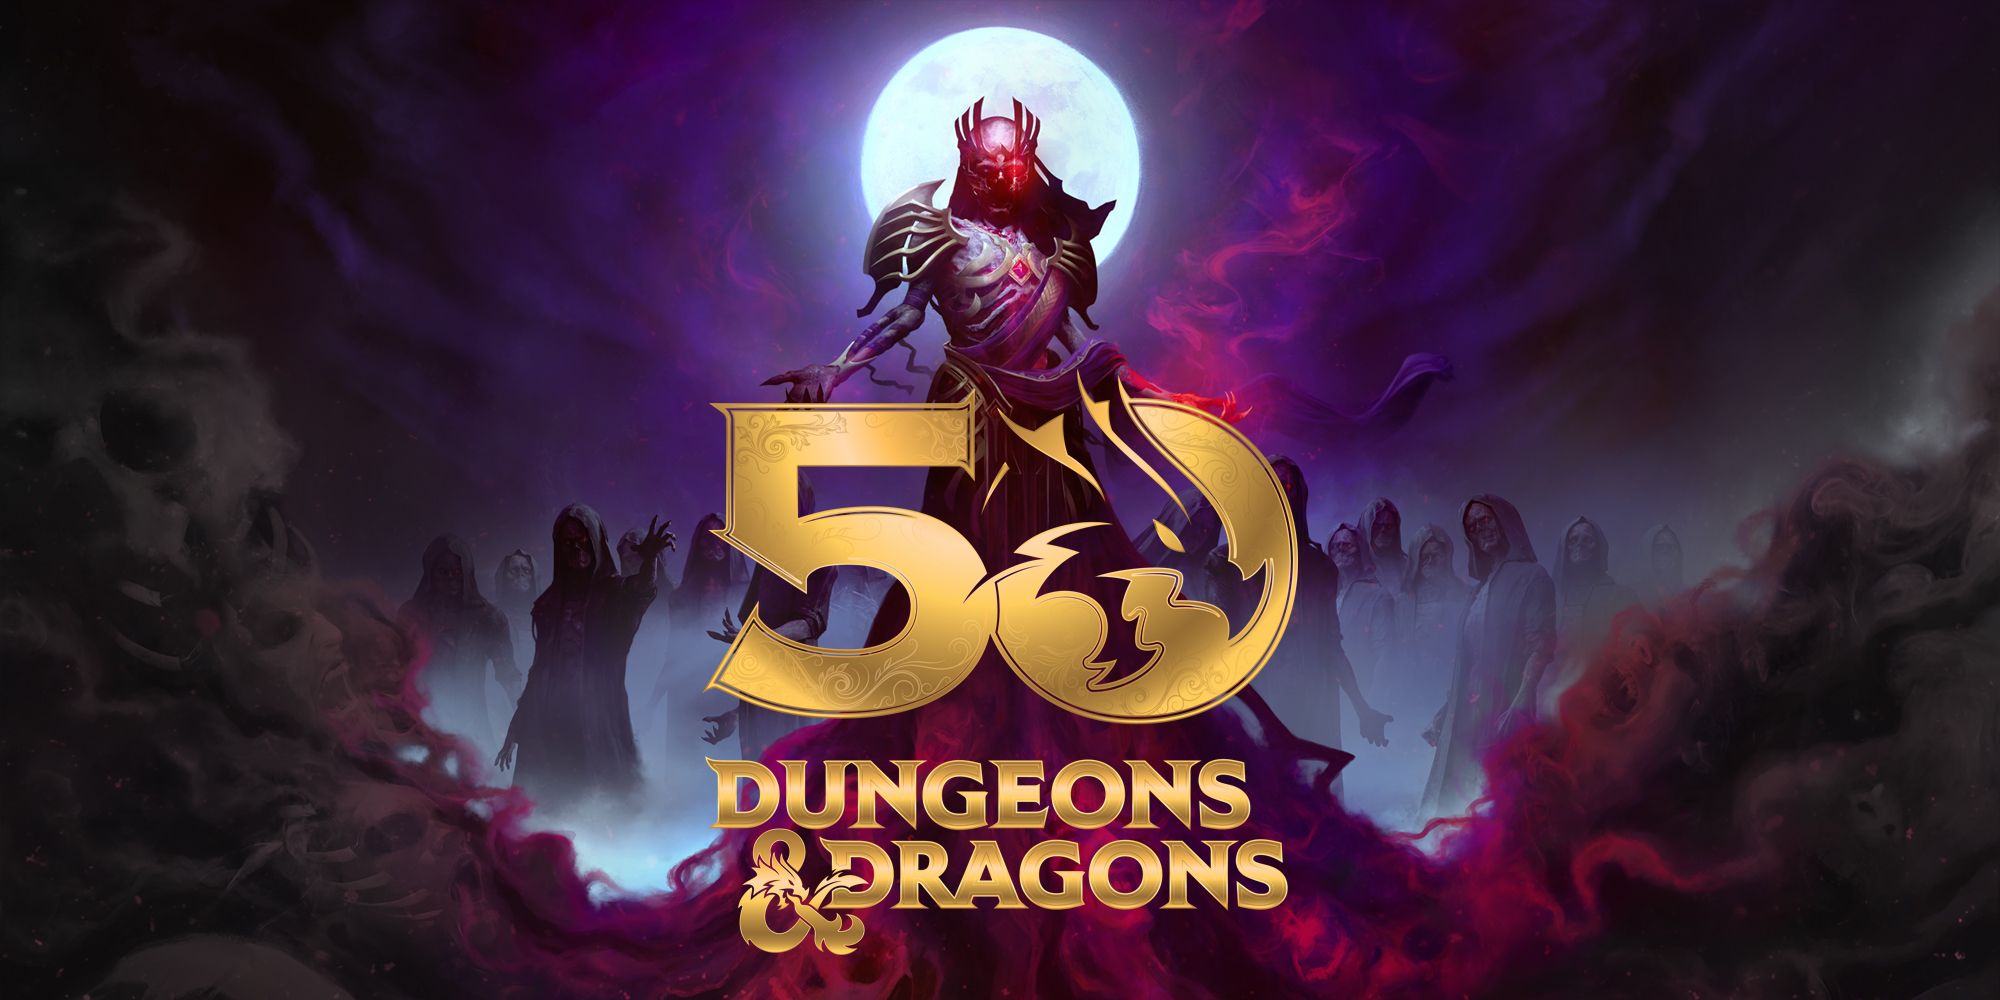 Vecna looming in front of a moon and behind D&D's 50th anniversary logo.